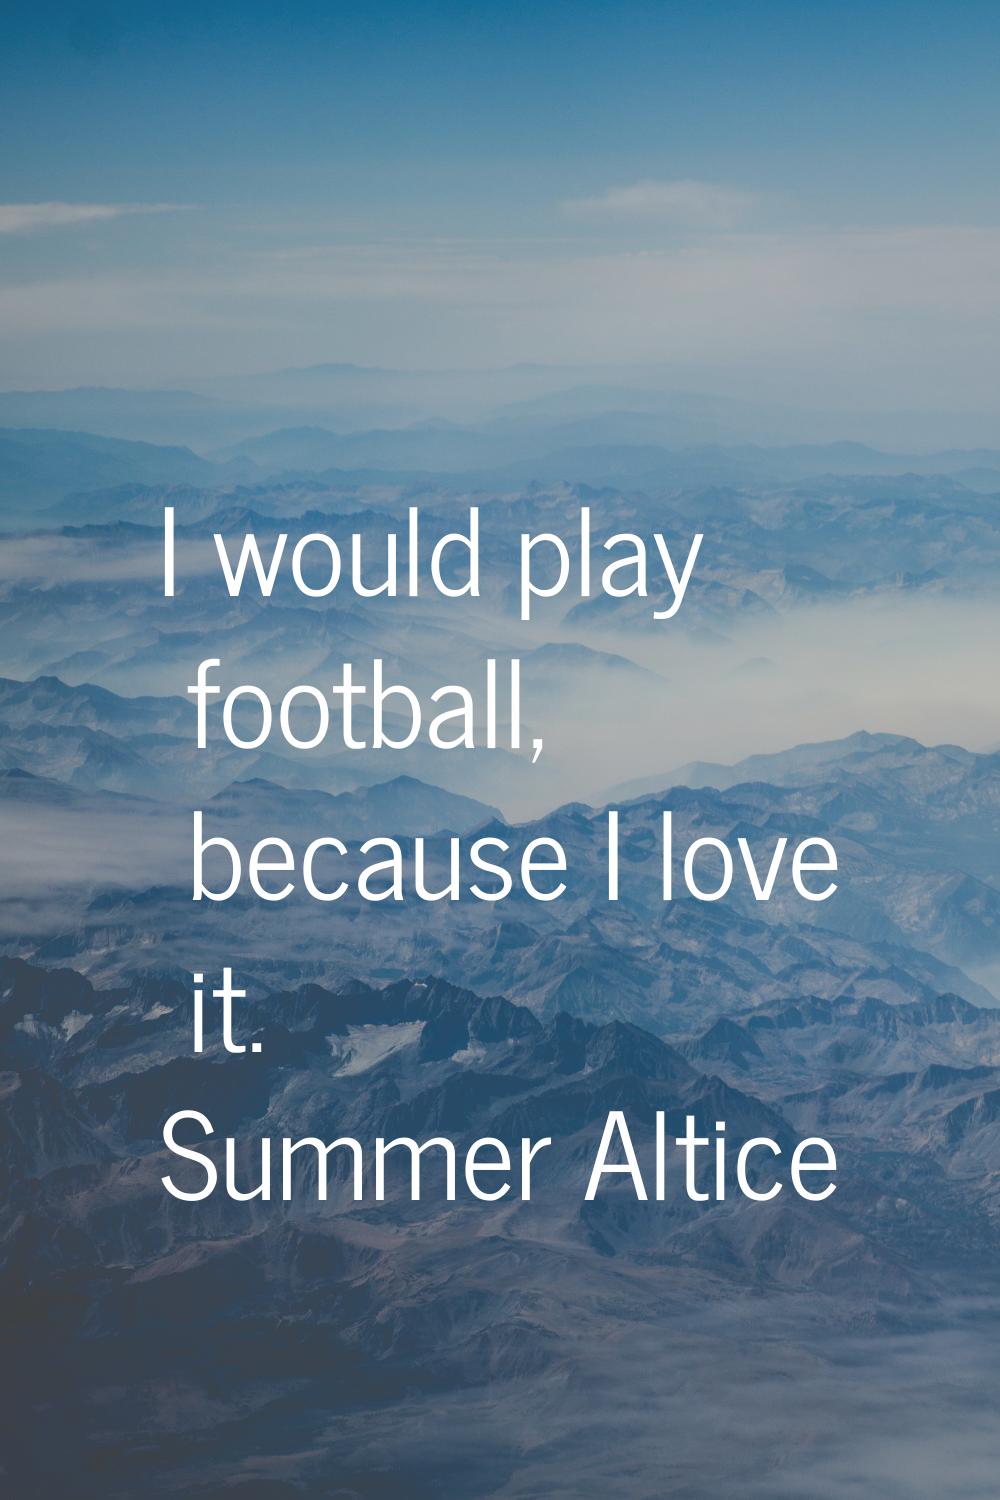 I would play football, because I love it.